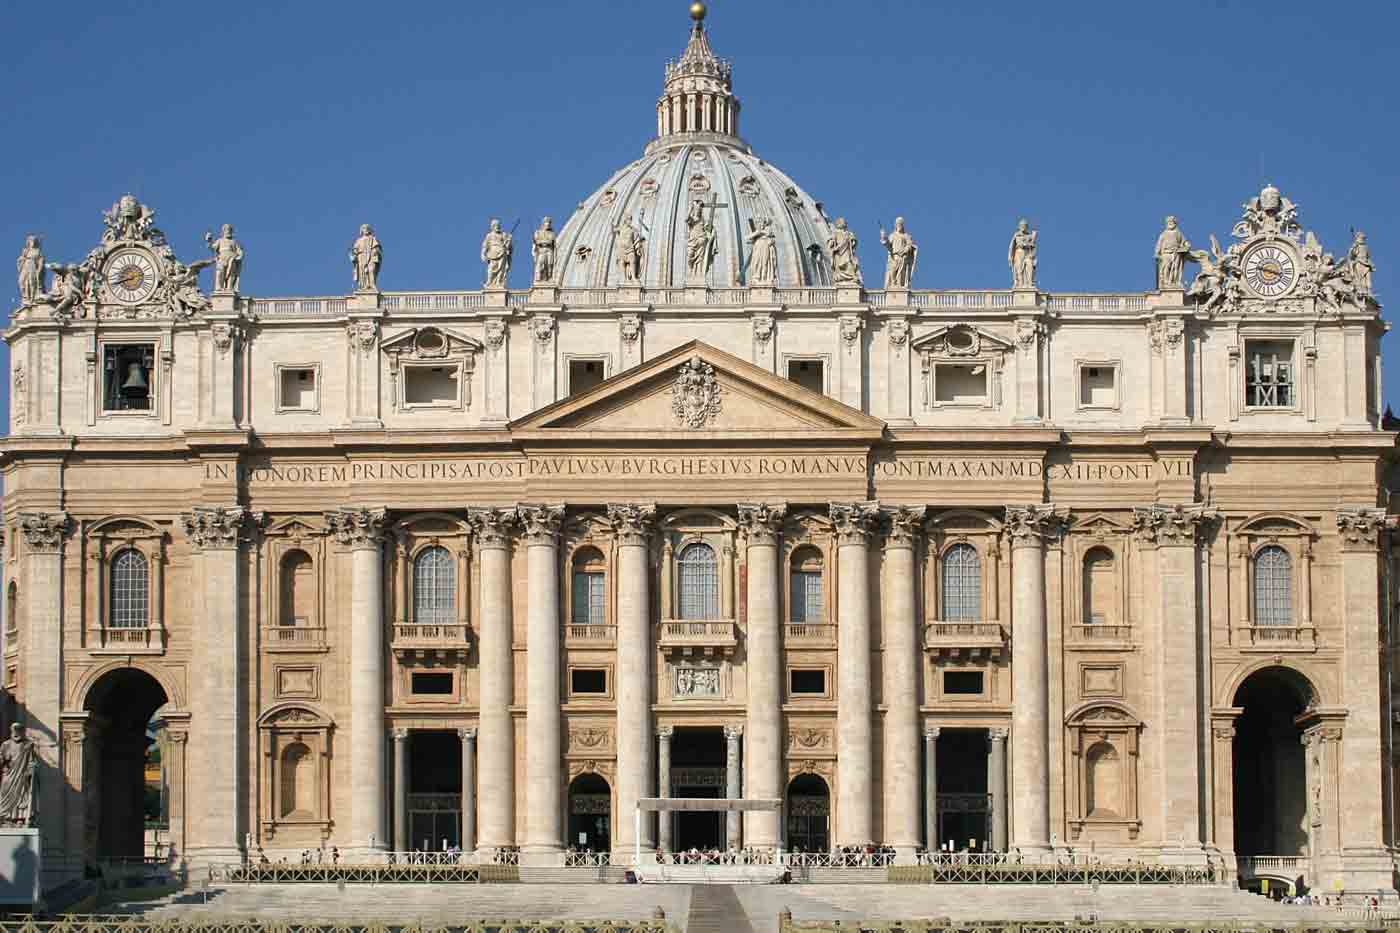 Saint Peter's Basilica from outside